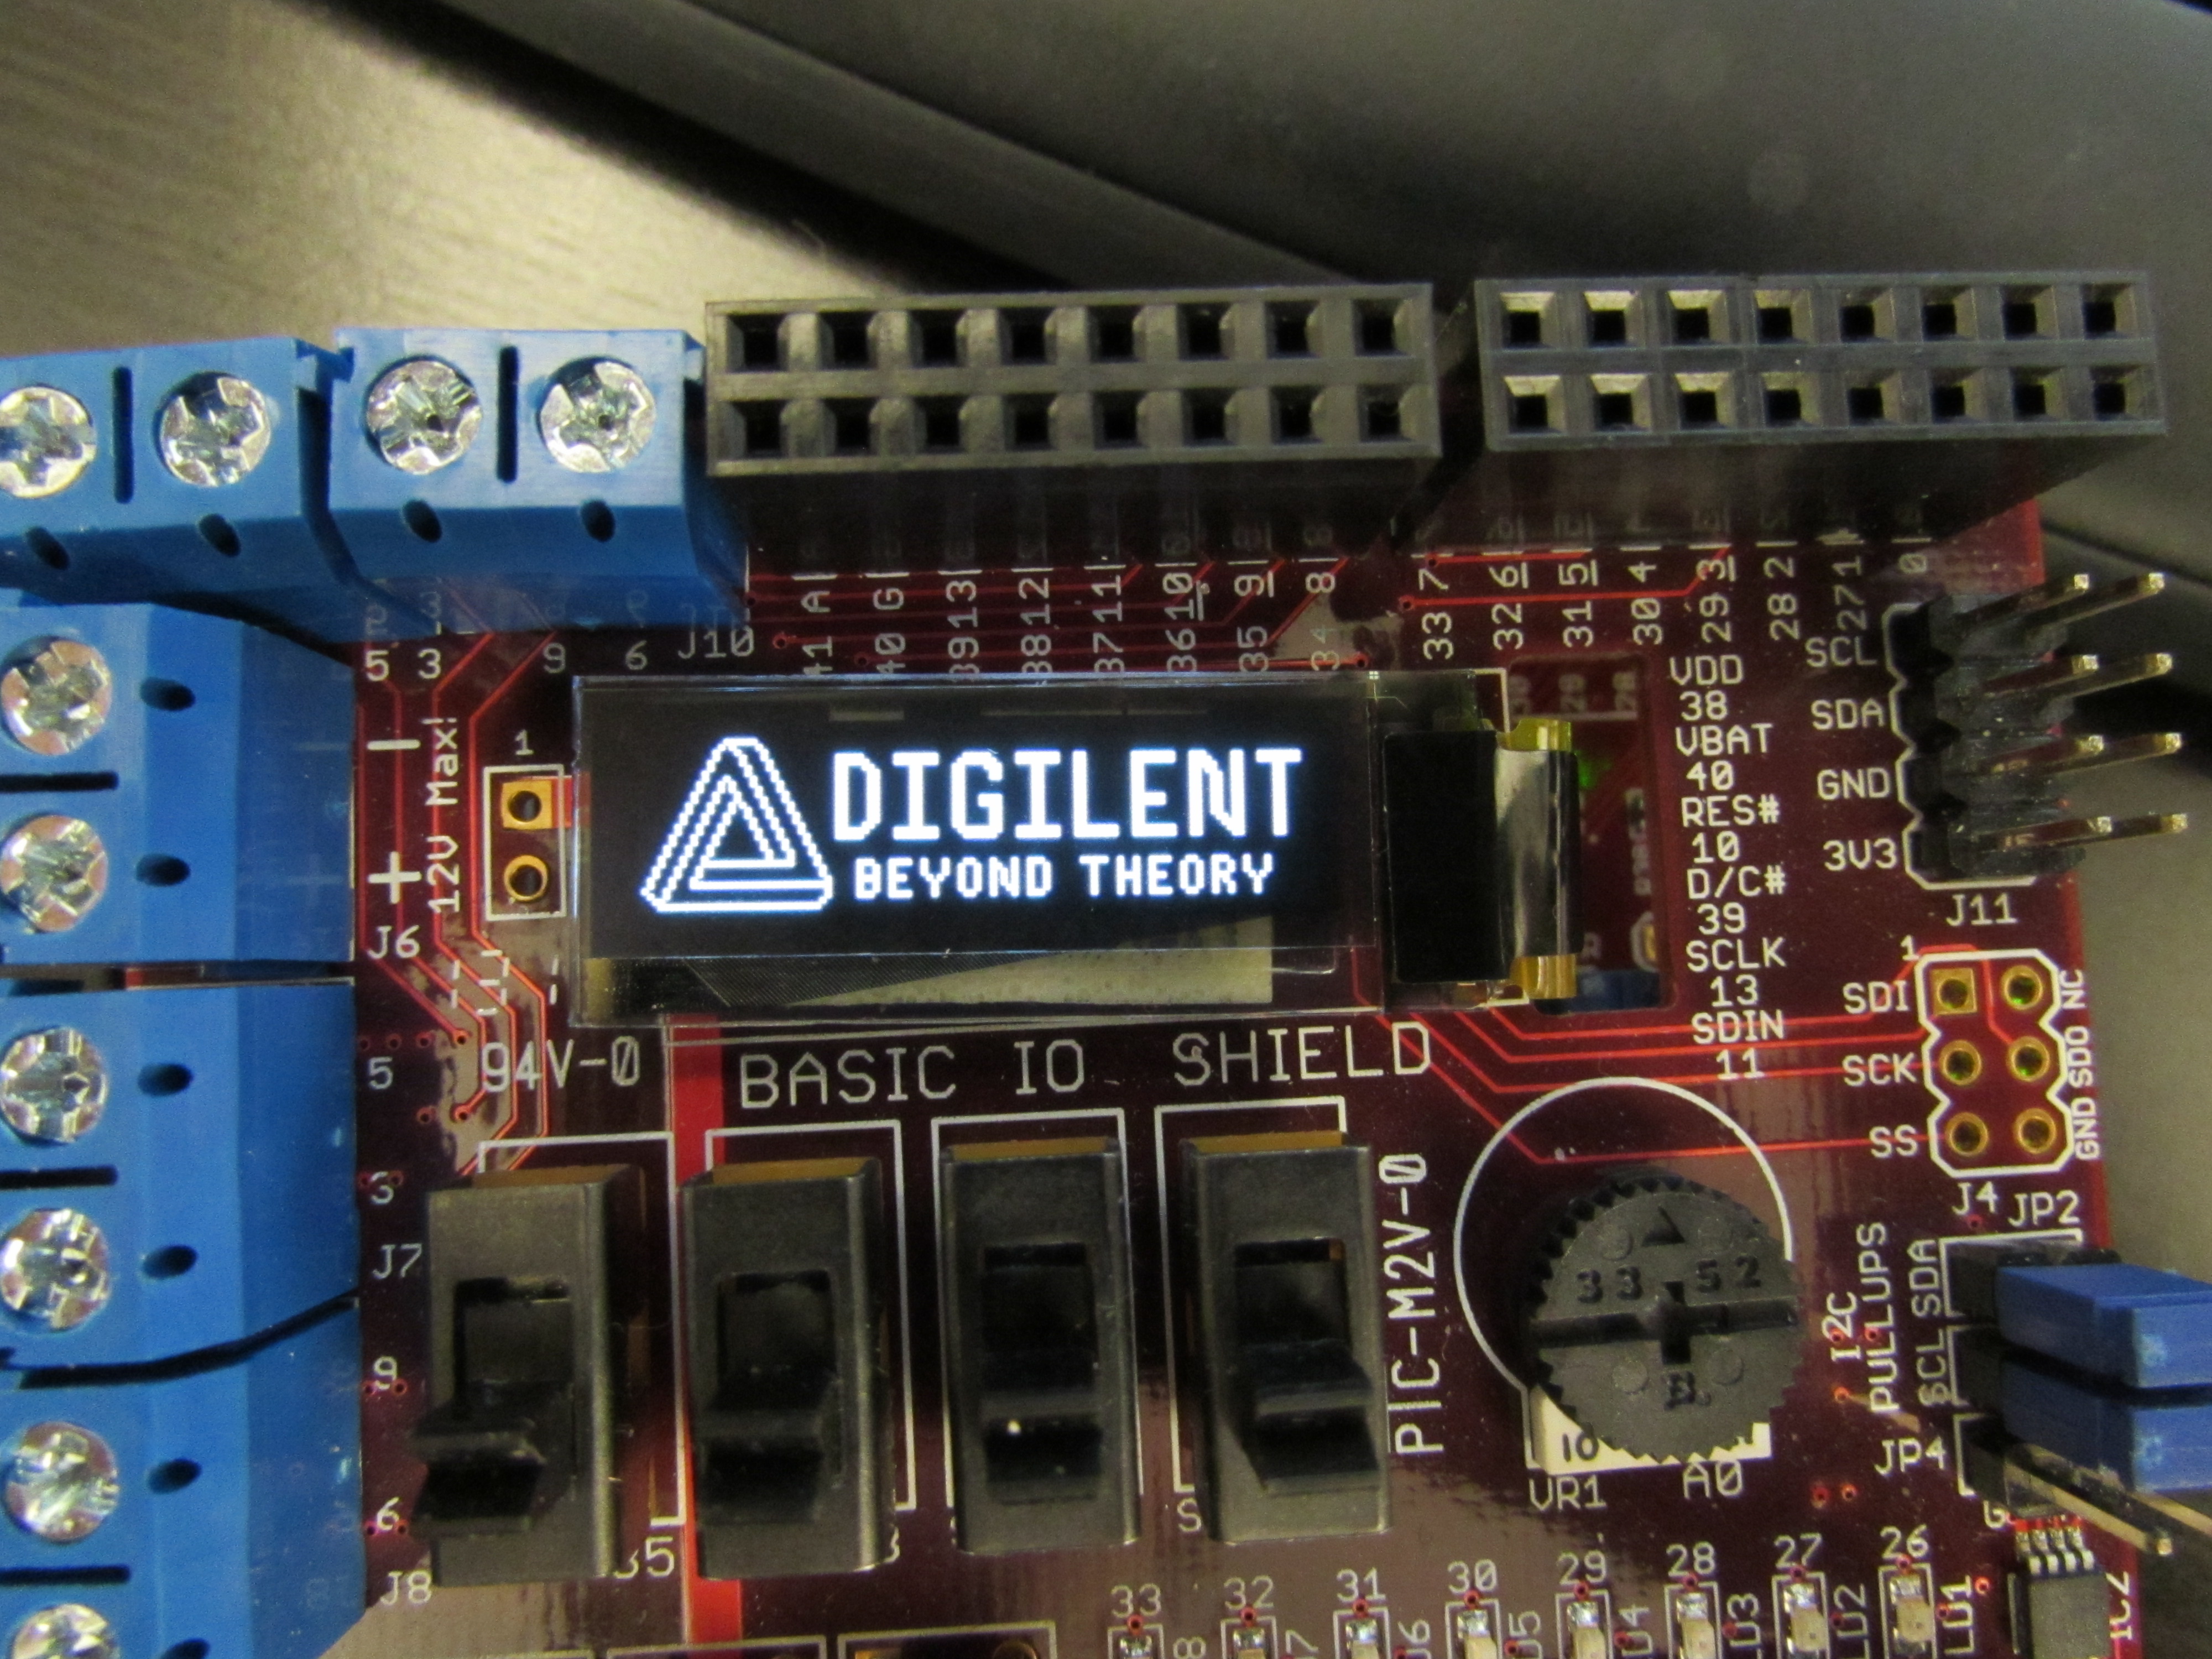 One of Digilent's logos on the PmodOLED present on the Basic I/O Shield